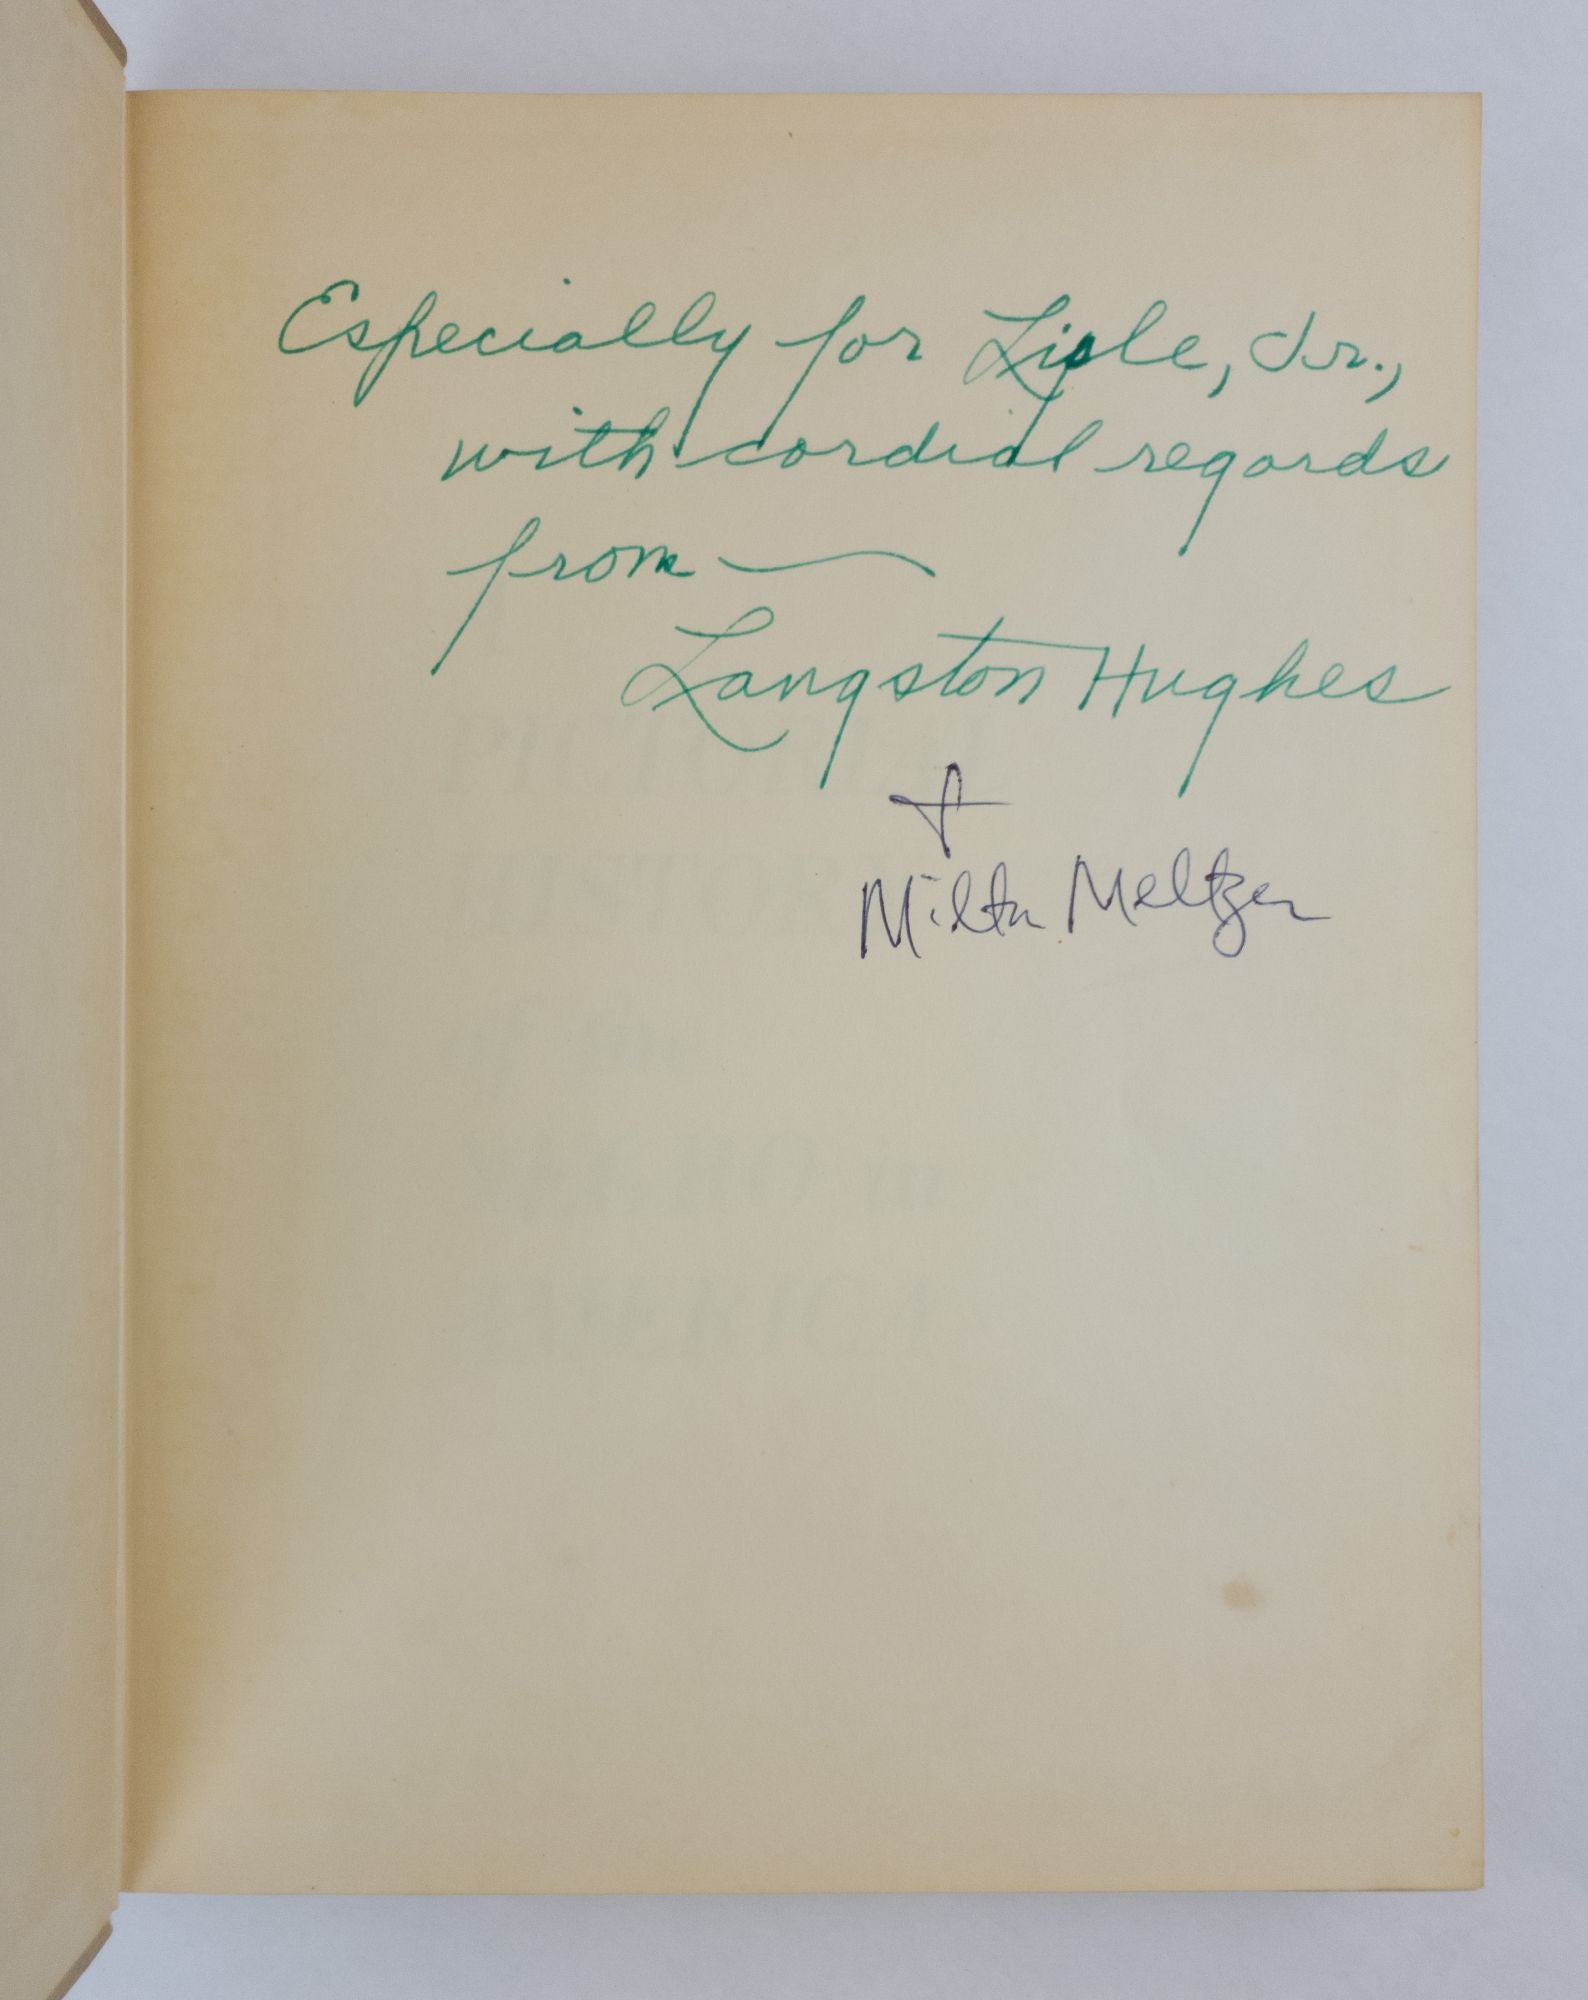 Product Image for A PICTORIAL HISTORY OF THE NEGRO IN AMERICA [Inscribed to Lisle Carter]